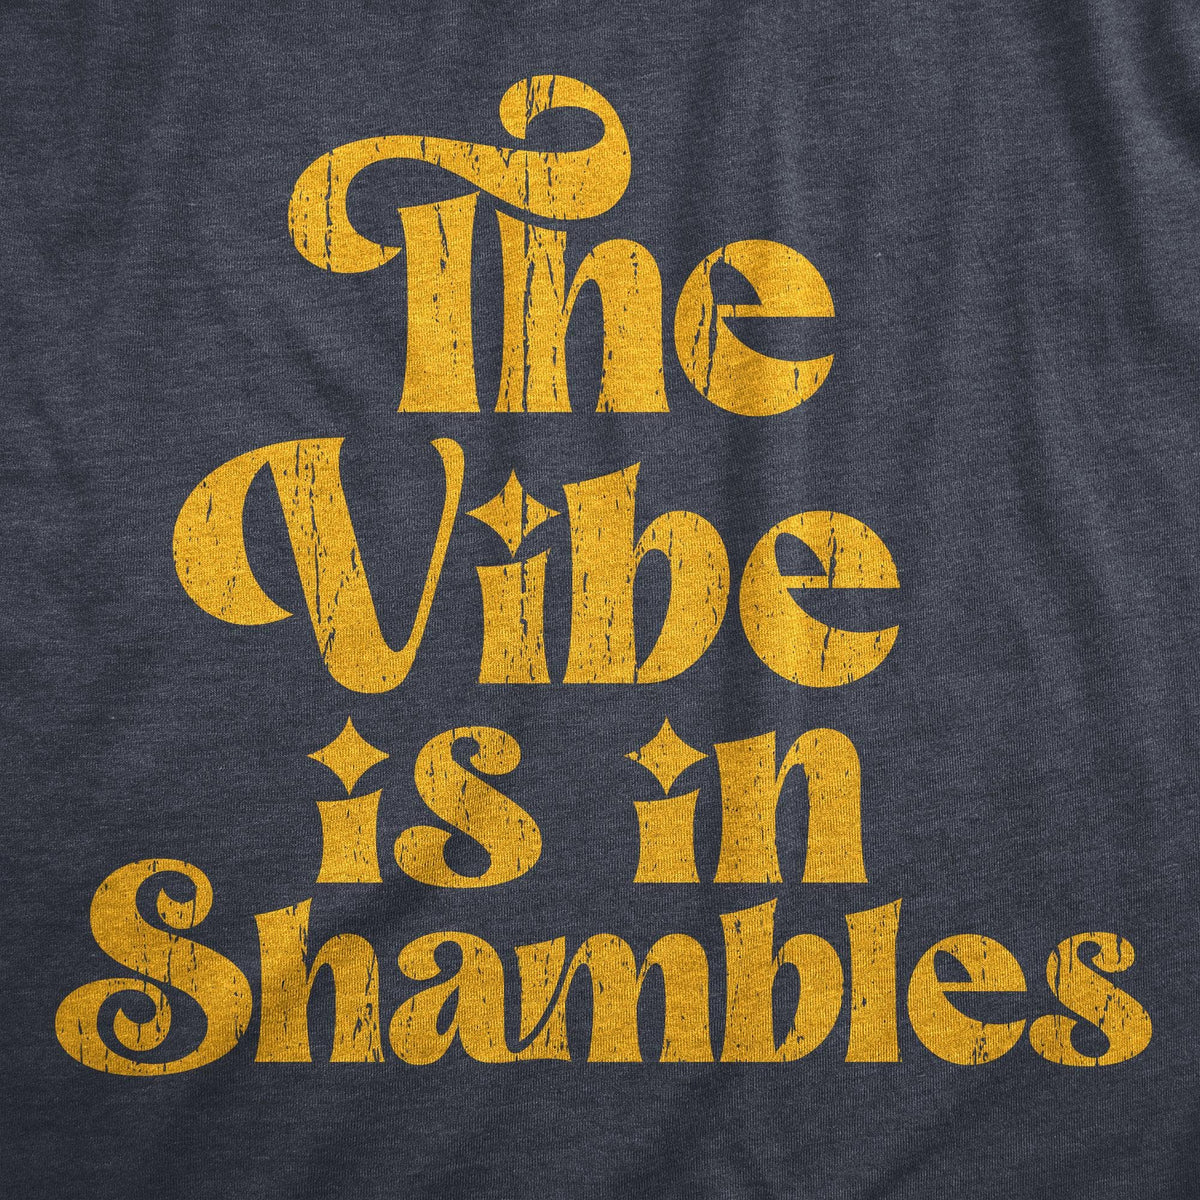 The Vibe Is In Shambles Men&#39;s Tshirt  -  Crazy Dog T-Shirts